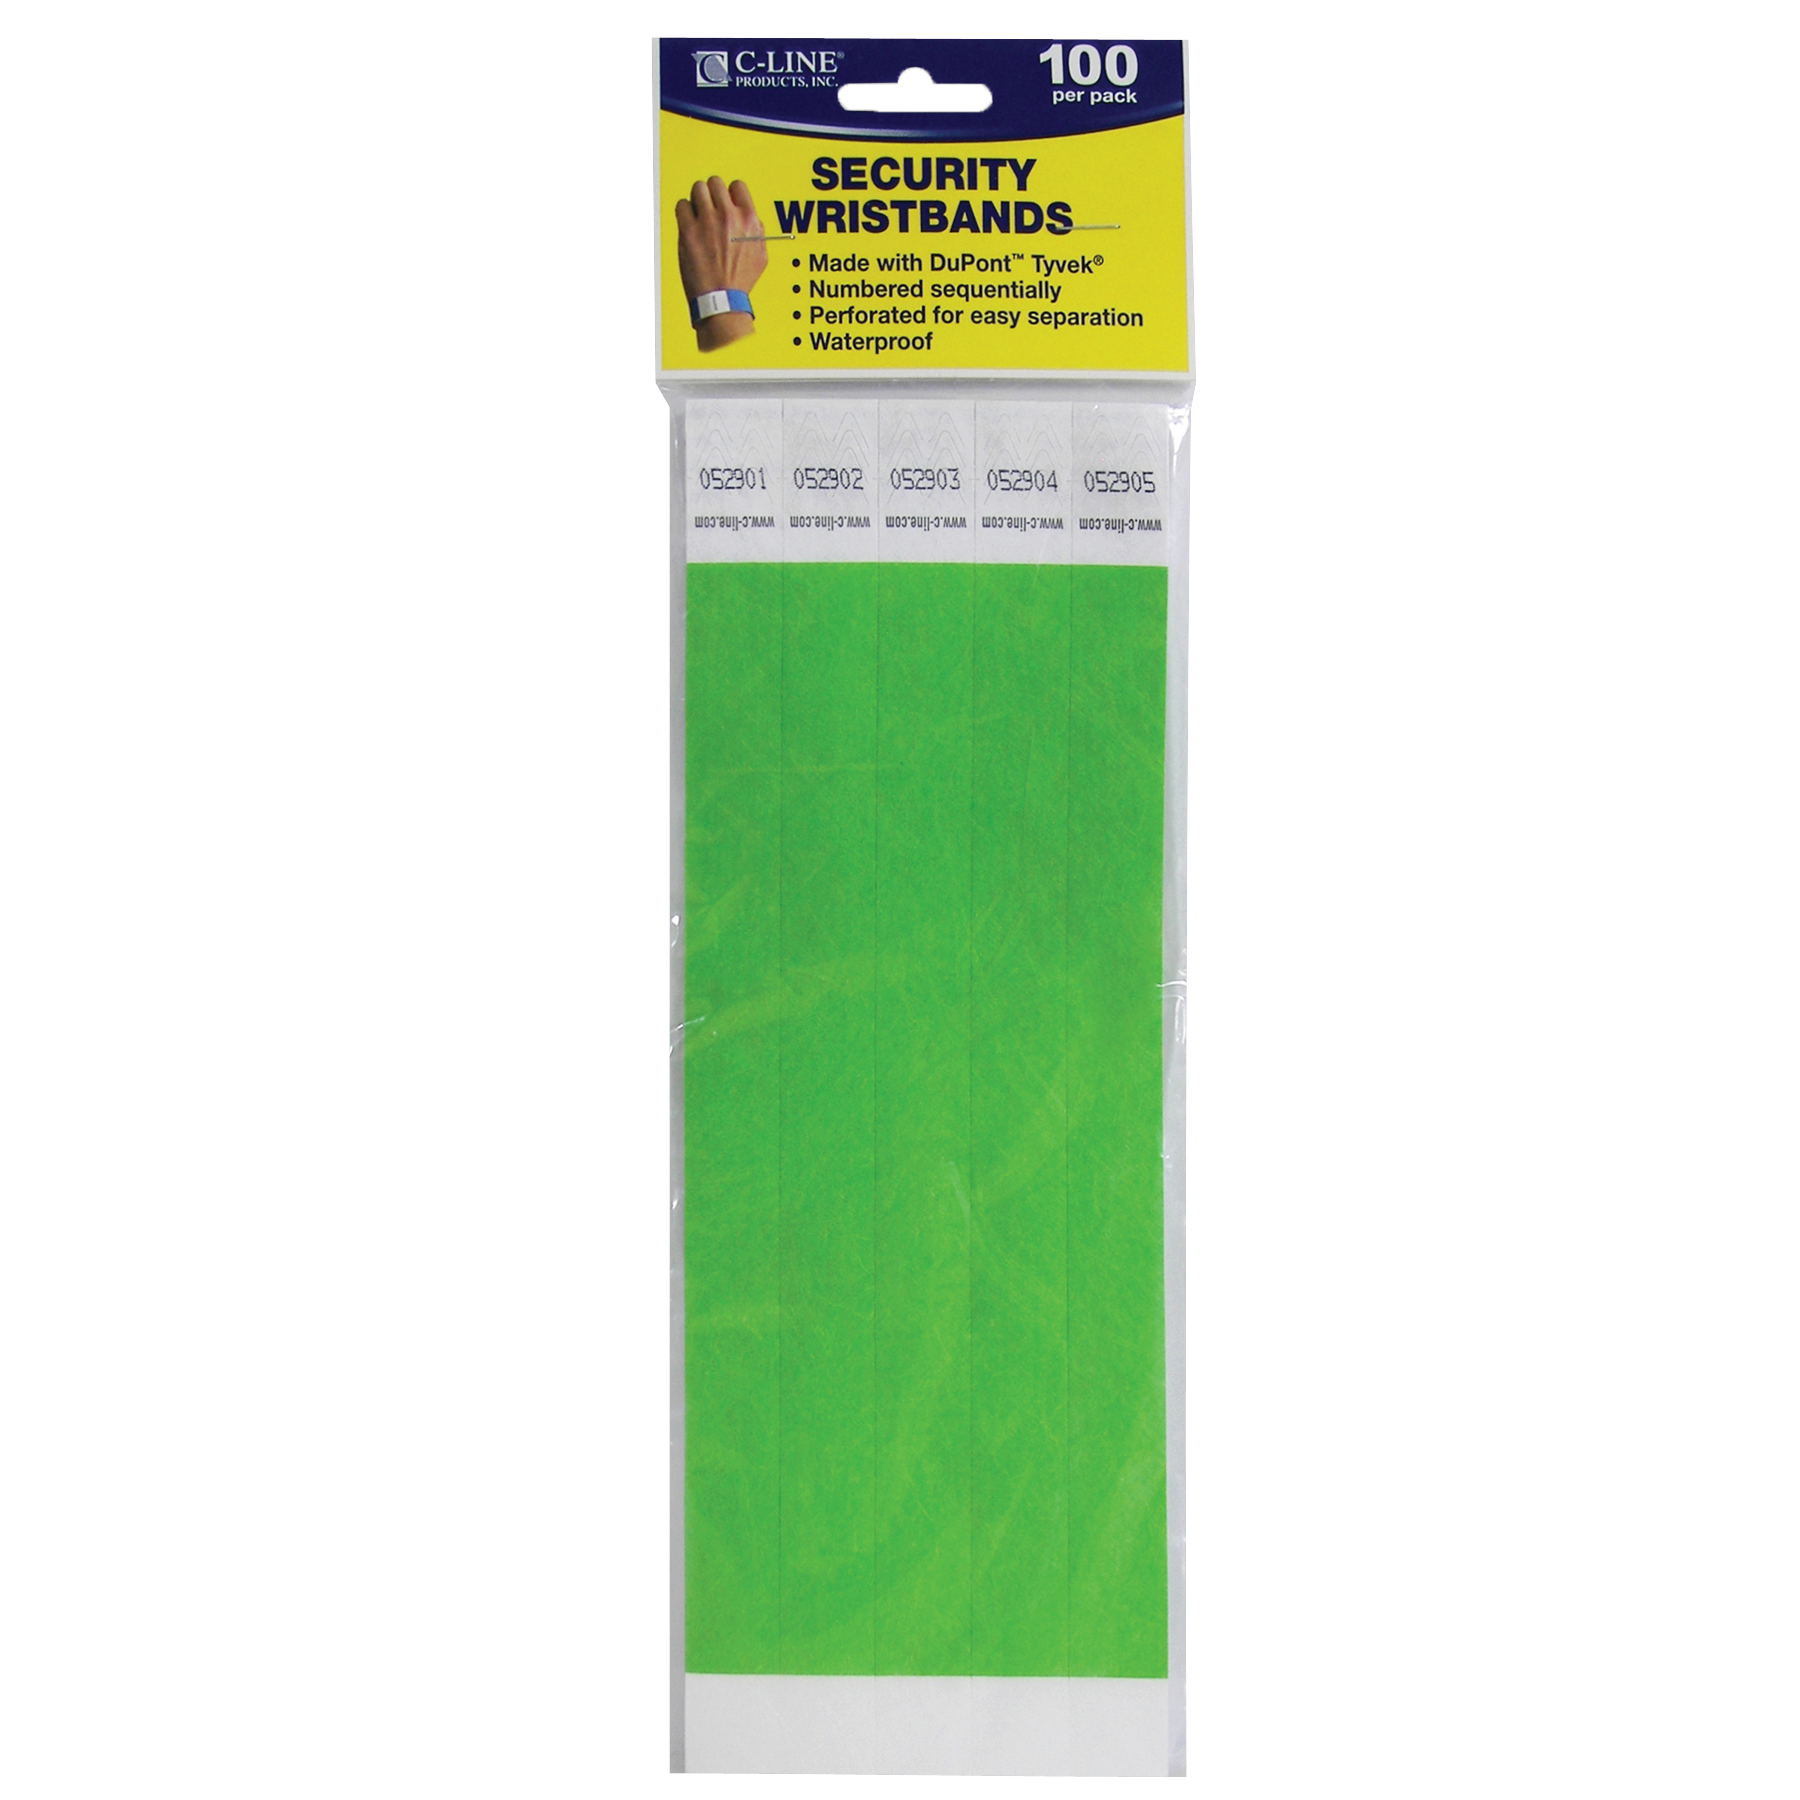 DuPont Tyvek Security Wristbands, Green, Pack of 100